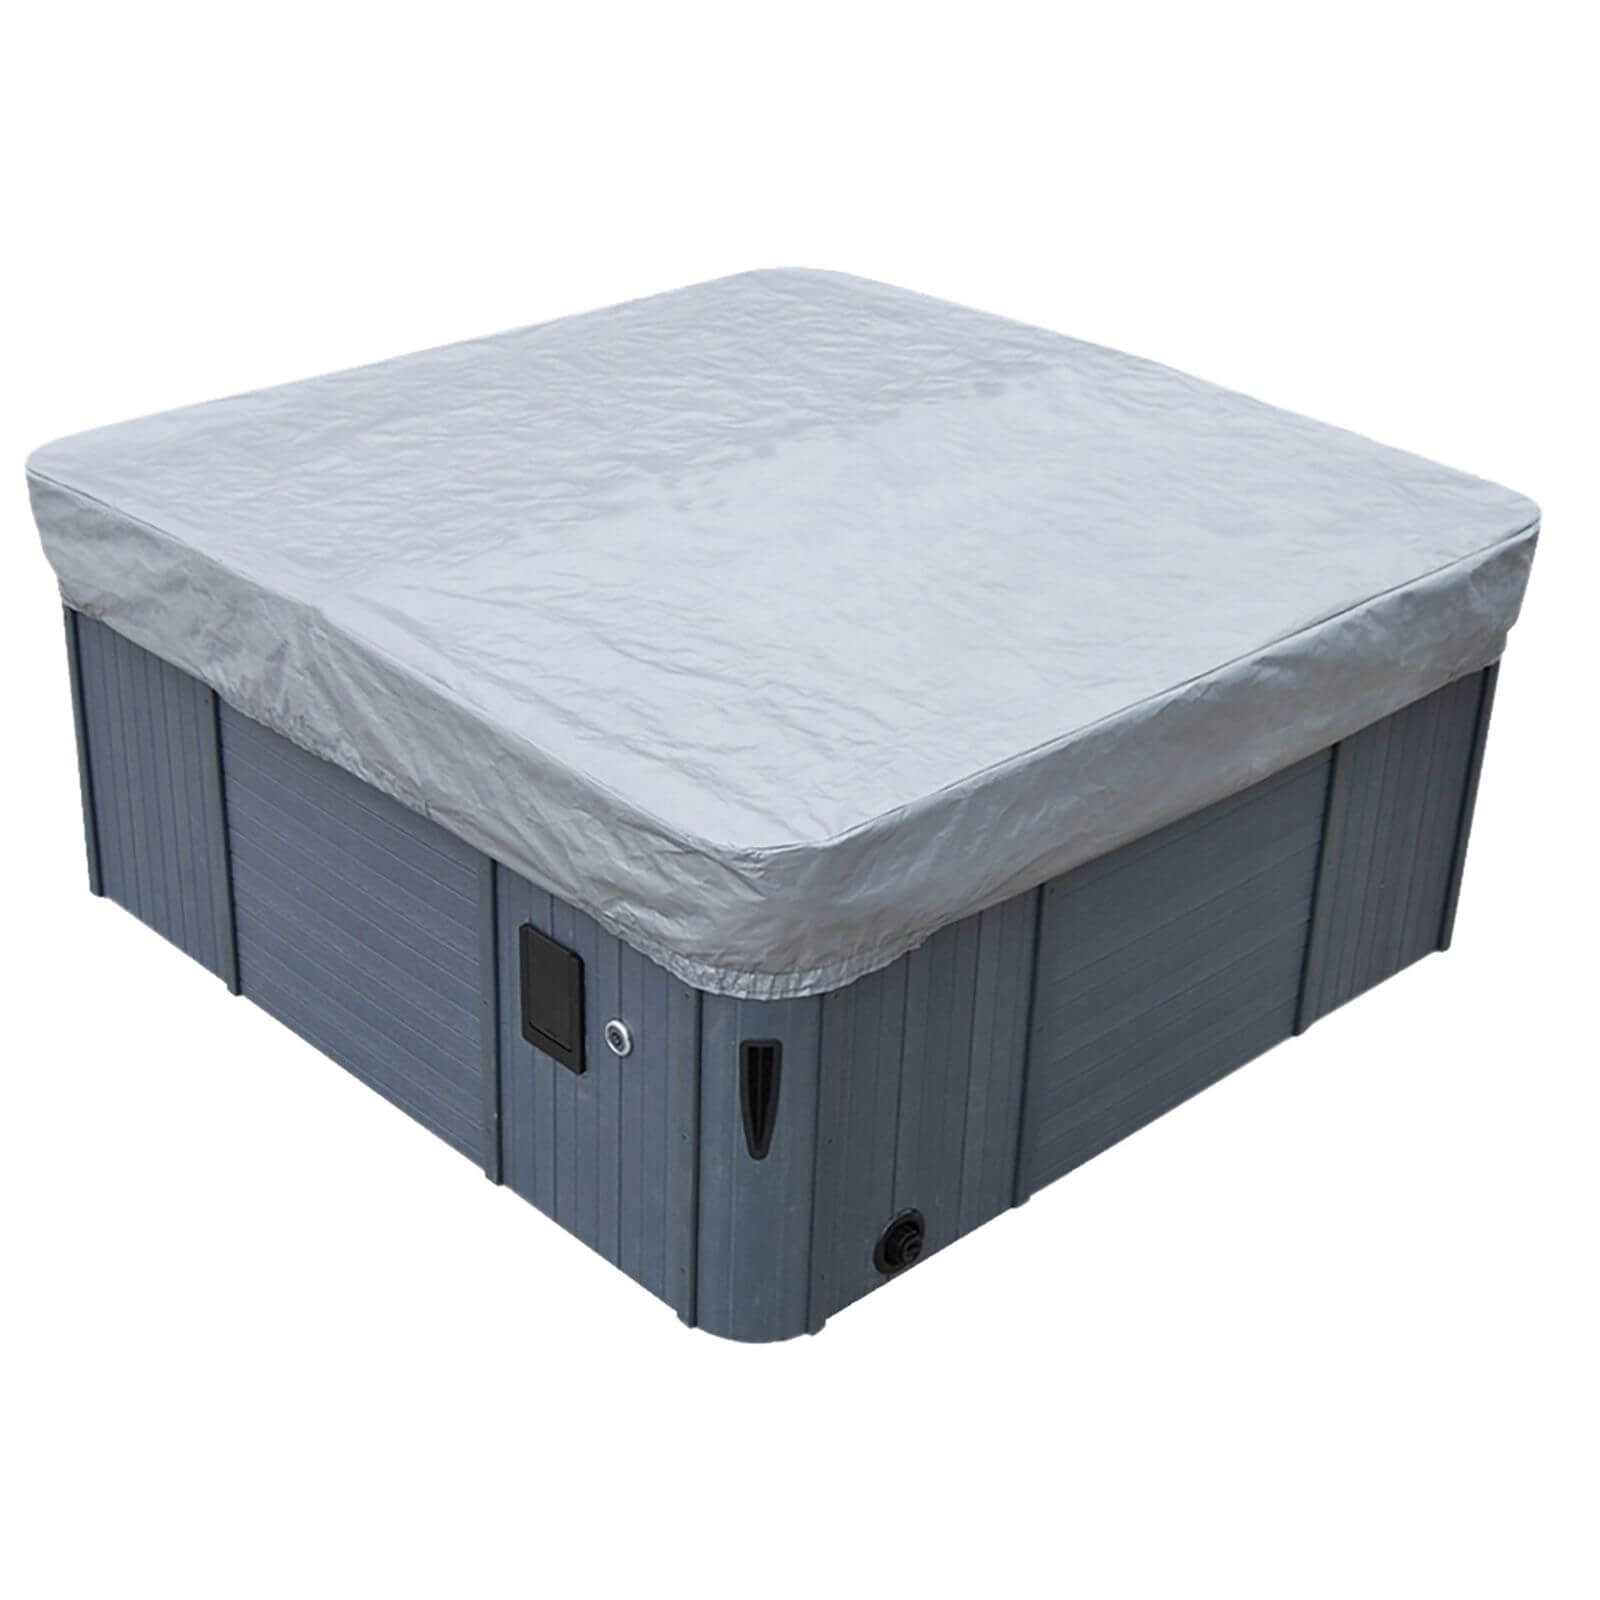 Canadian Spa Cover Guard - 96 X 96In